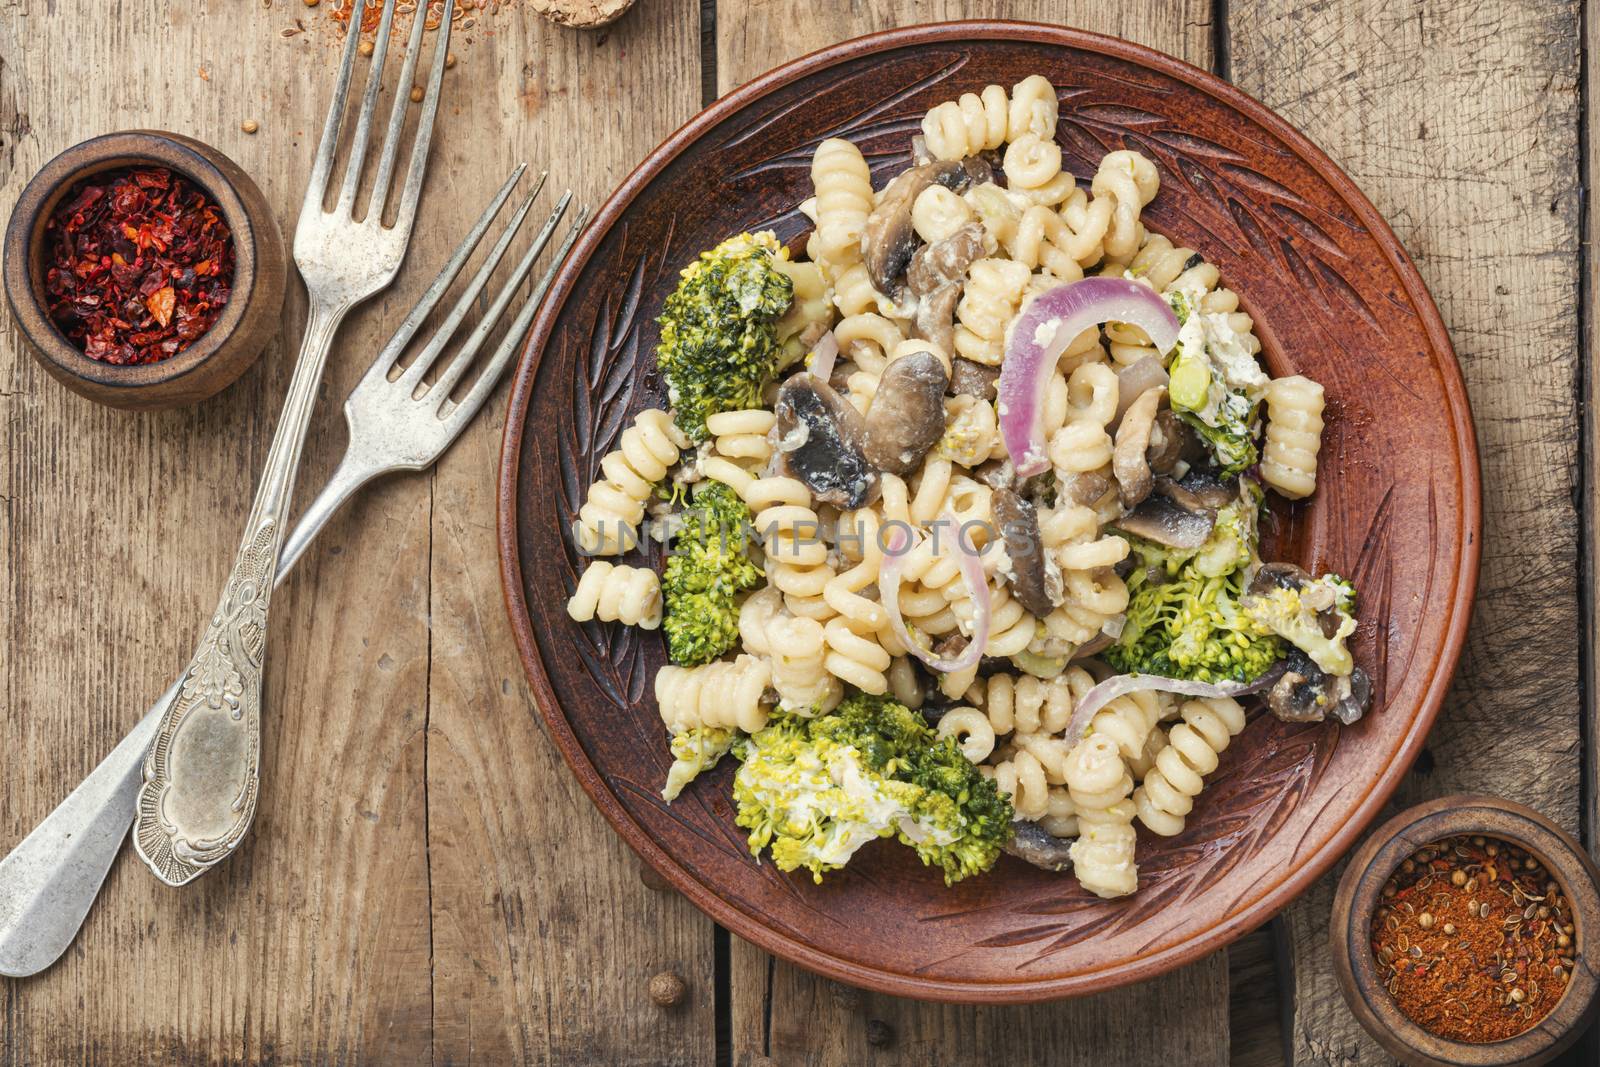 Broccoli and pasta with mushrooms.Vegetarian vegetable pasta wooden table.